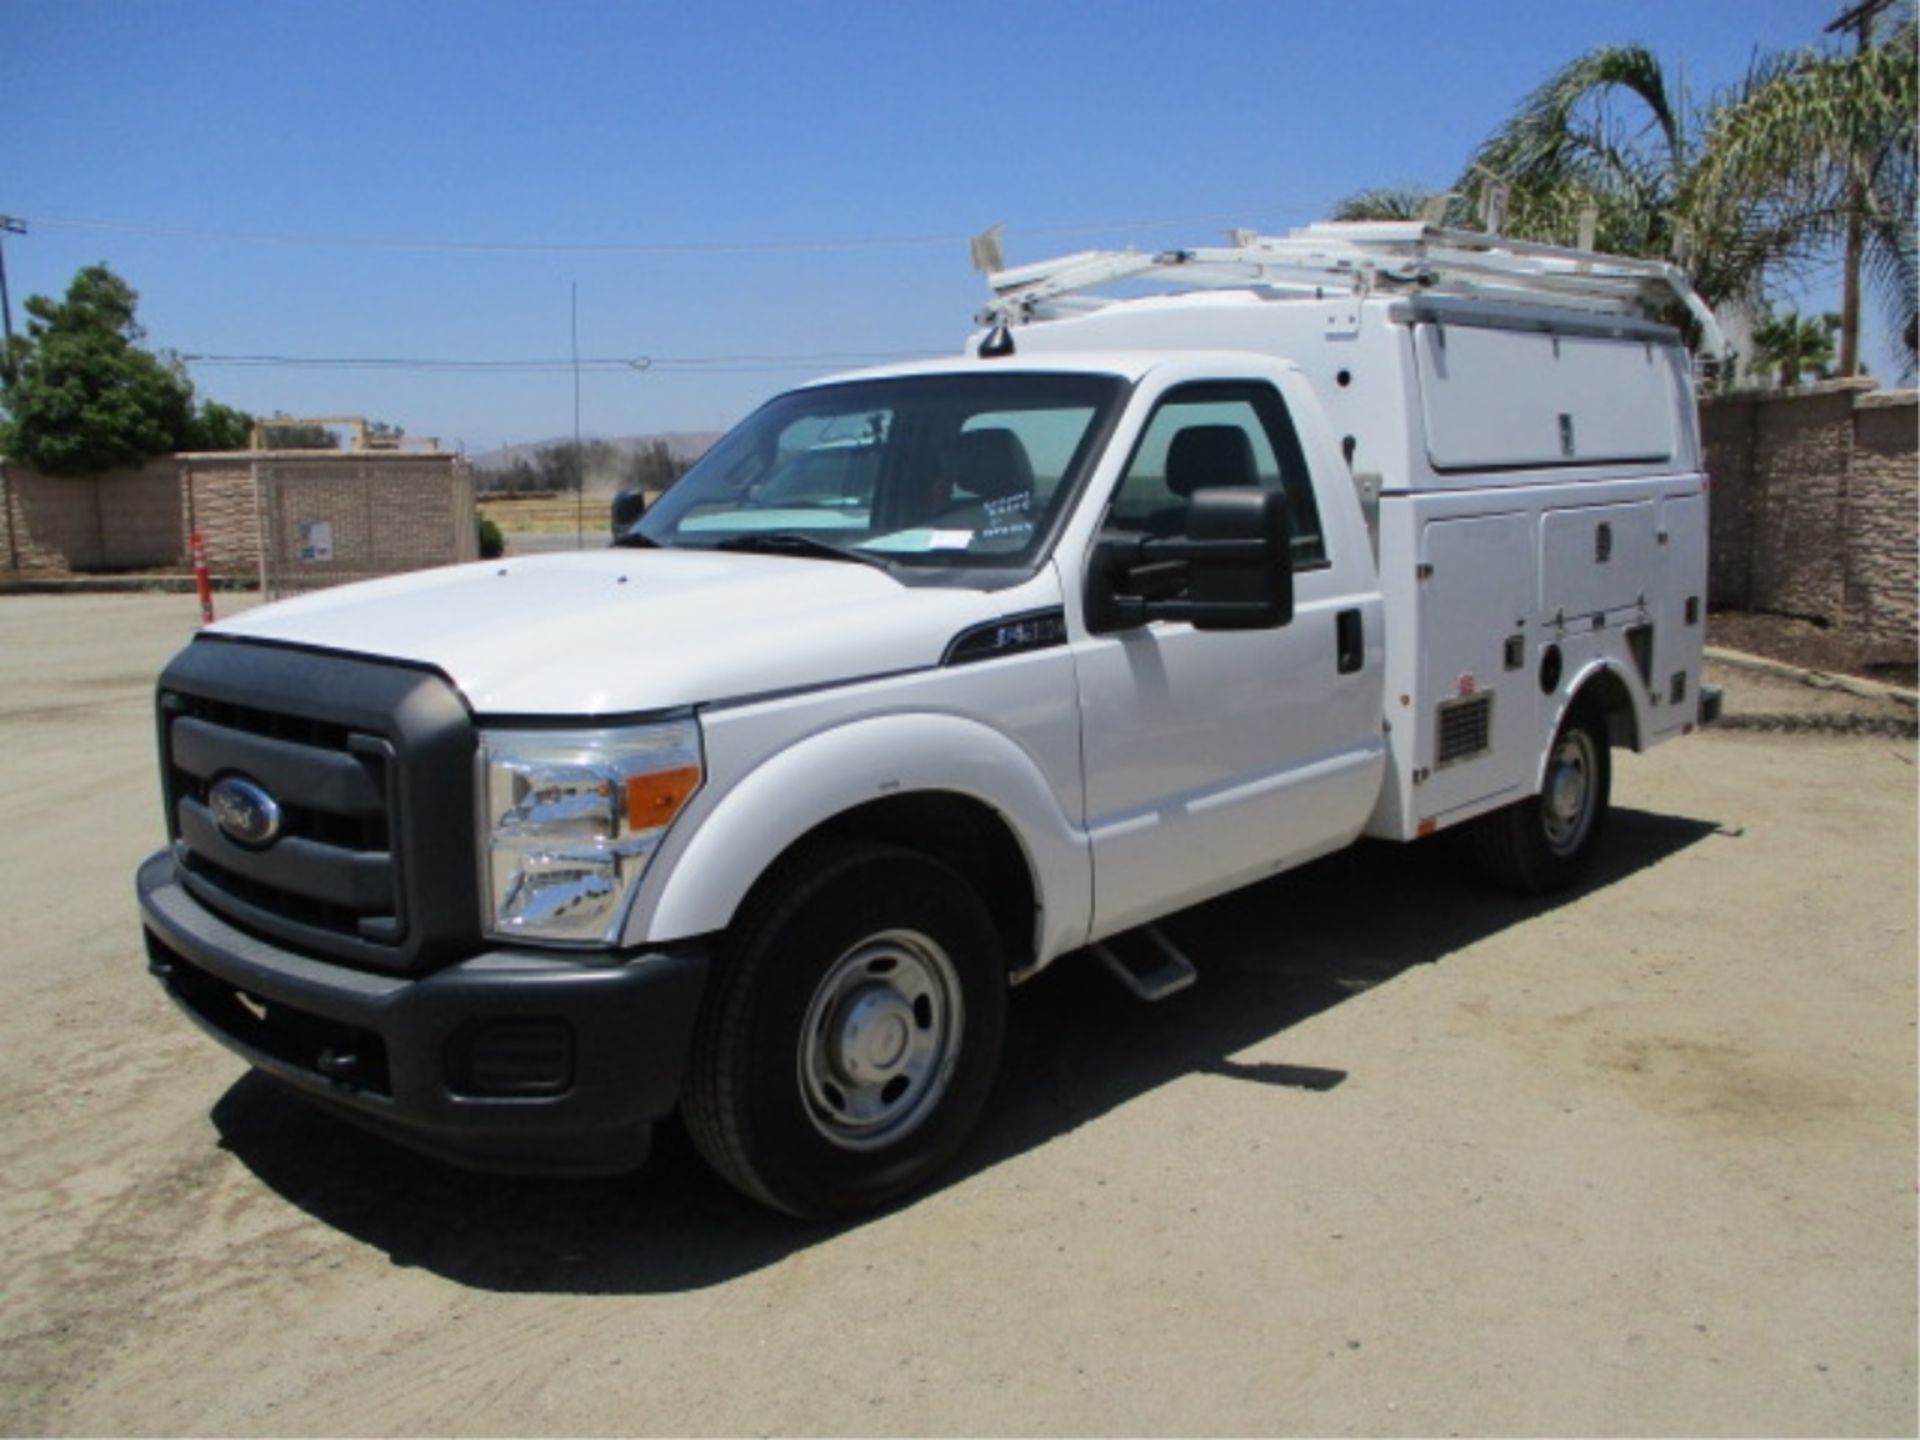 2013 Ford F350 SD Utility Truck, 6.2L V8 Gas, Automatic, Enclosed Utility Body, Onan Gas - Image 6 of 84